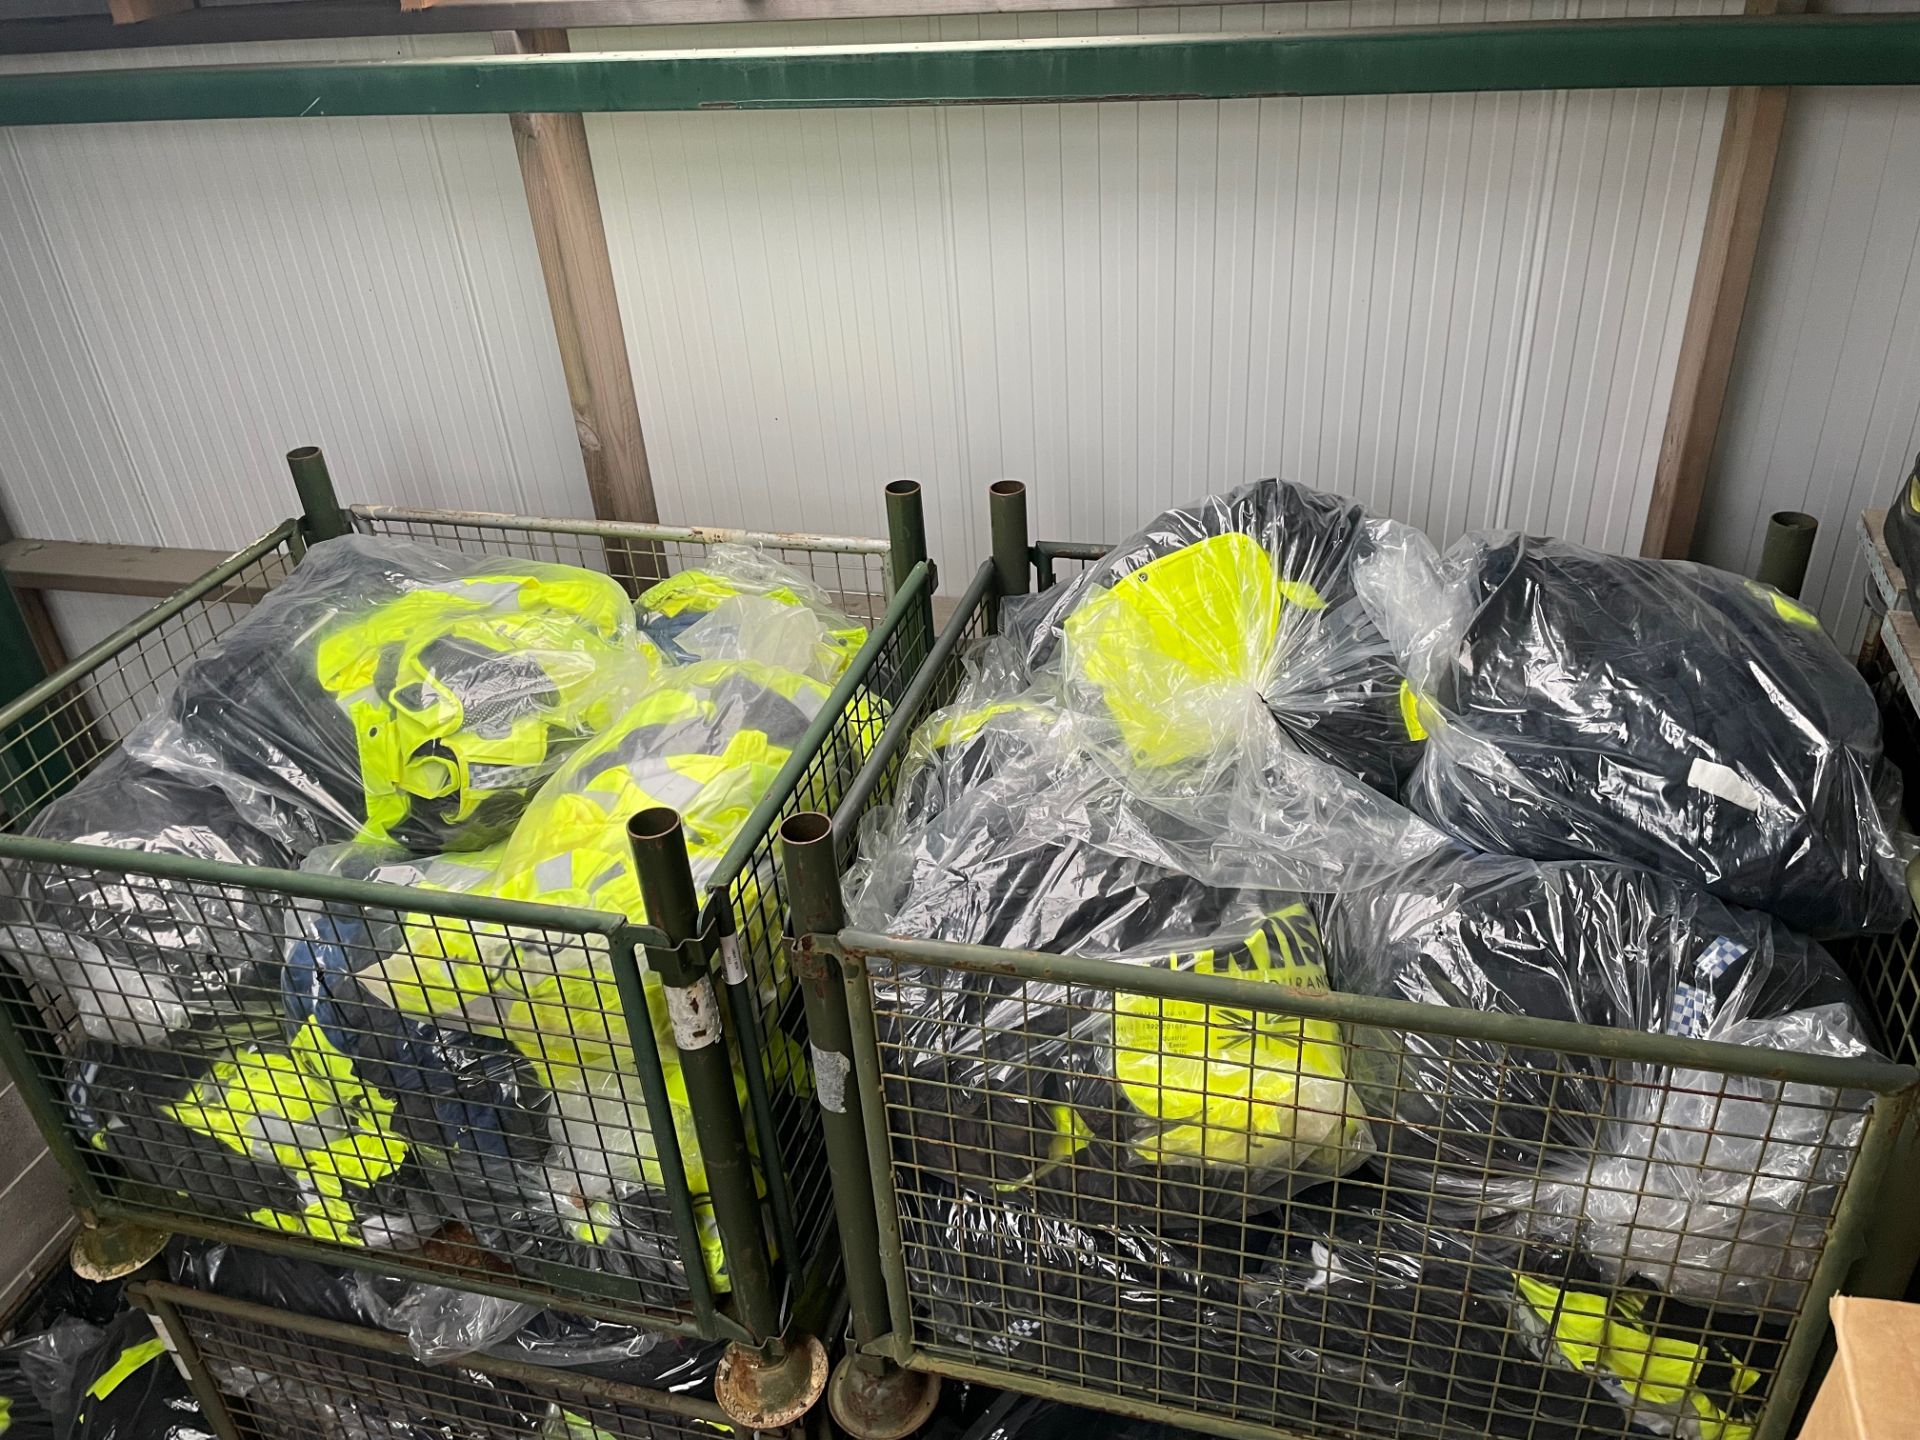 20 X BAGS FULL TO THE BRIM WITH POLICE CLOTHING & ACCESSORIES - RRP £5500.00 - NO VAT ON HAMMER